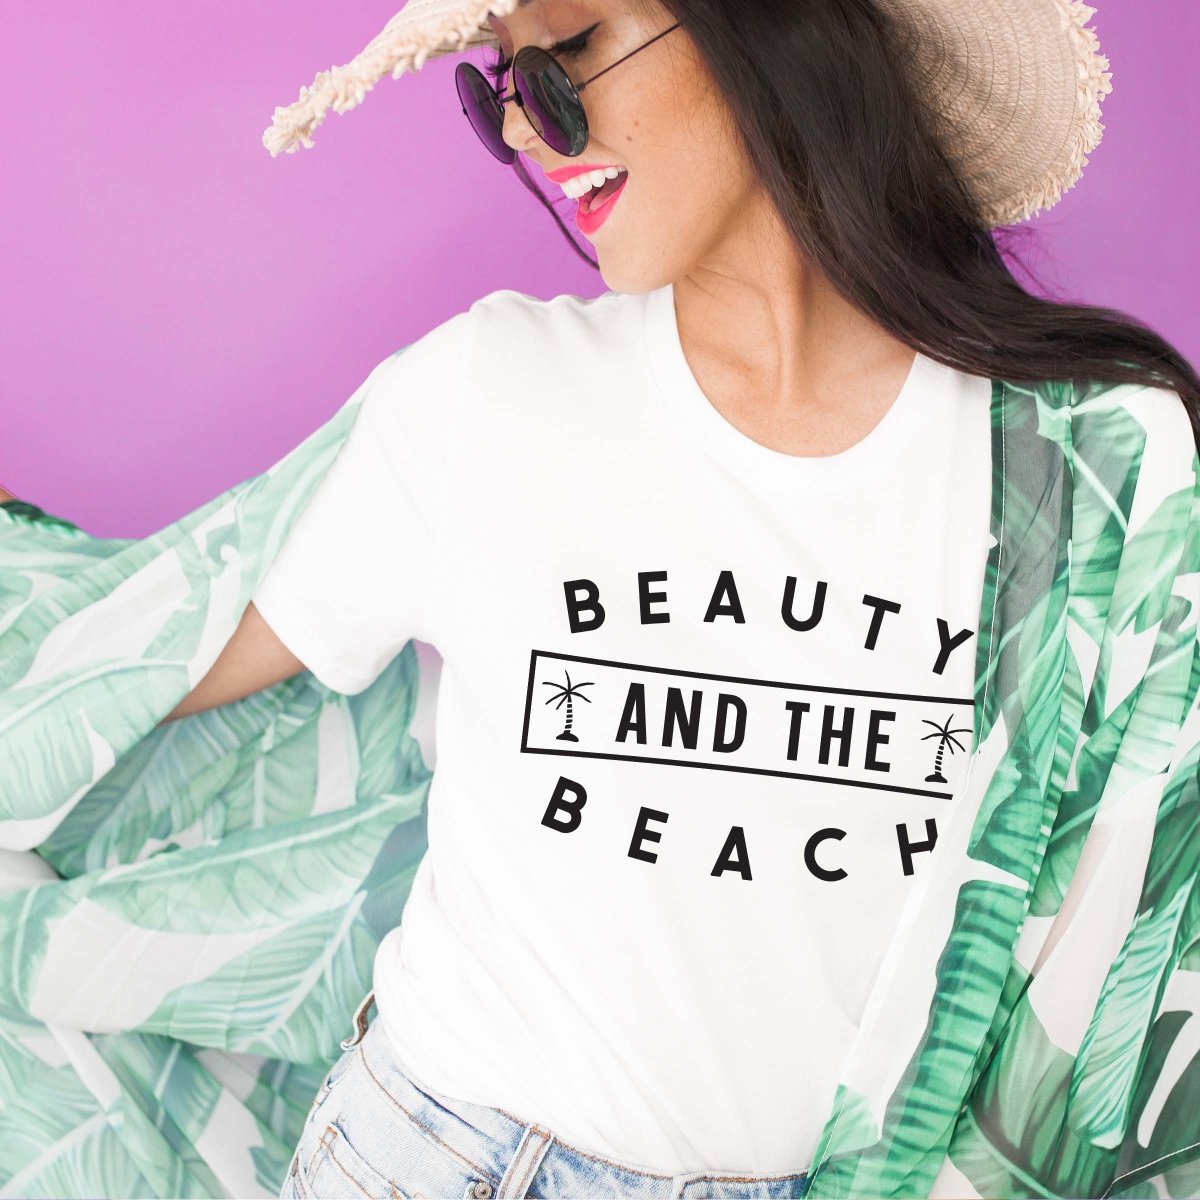 Beauty and the Beach Tee - Limeberry Designs